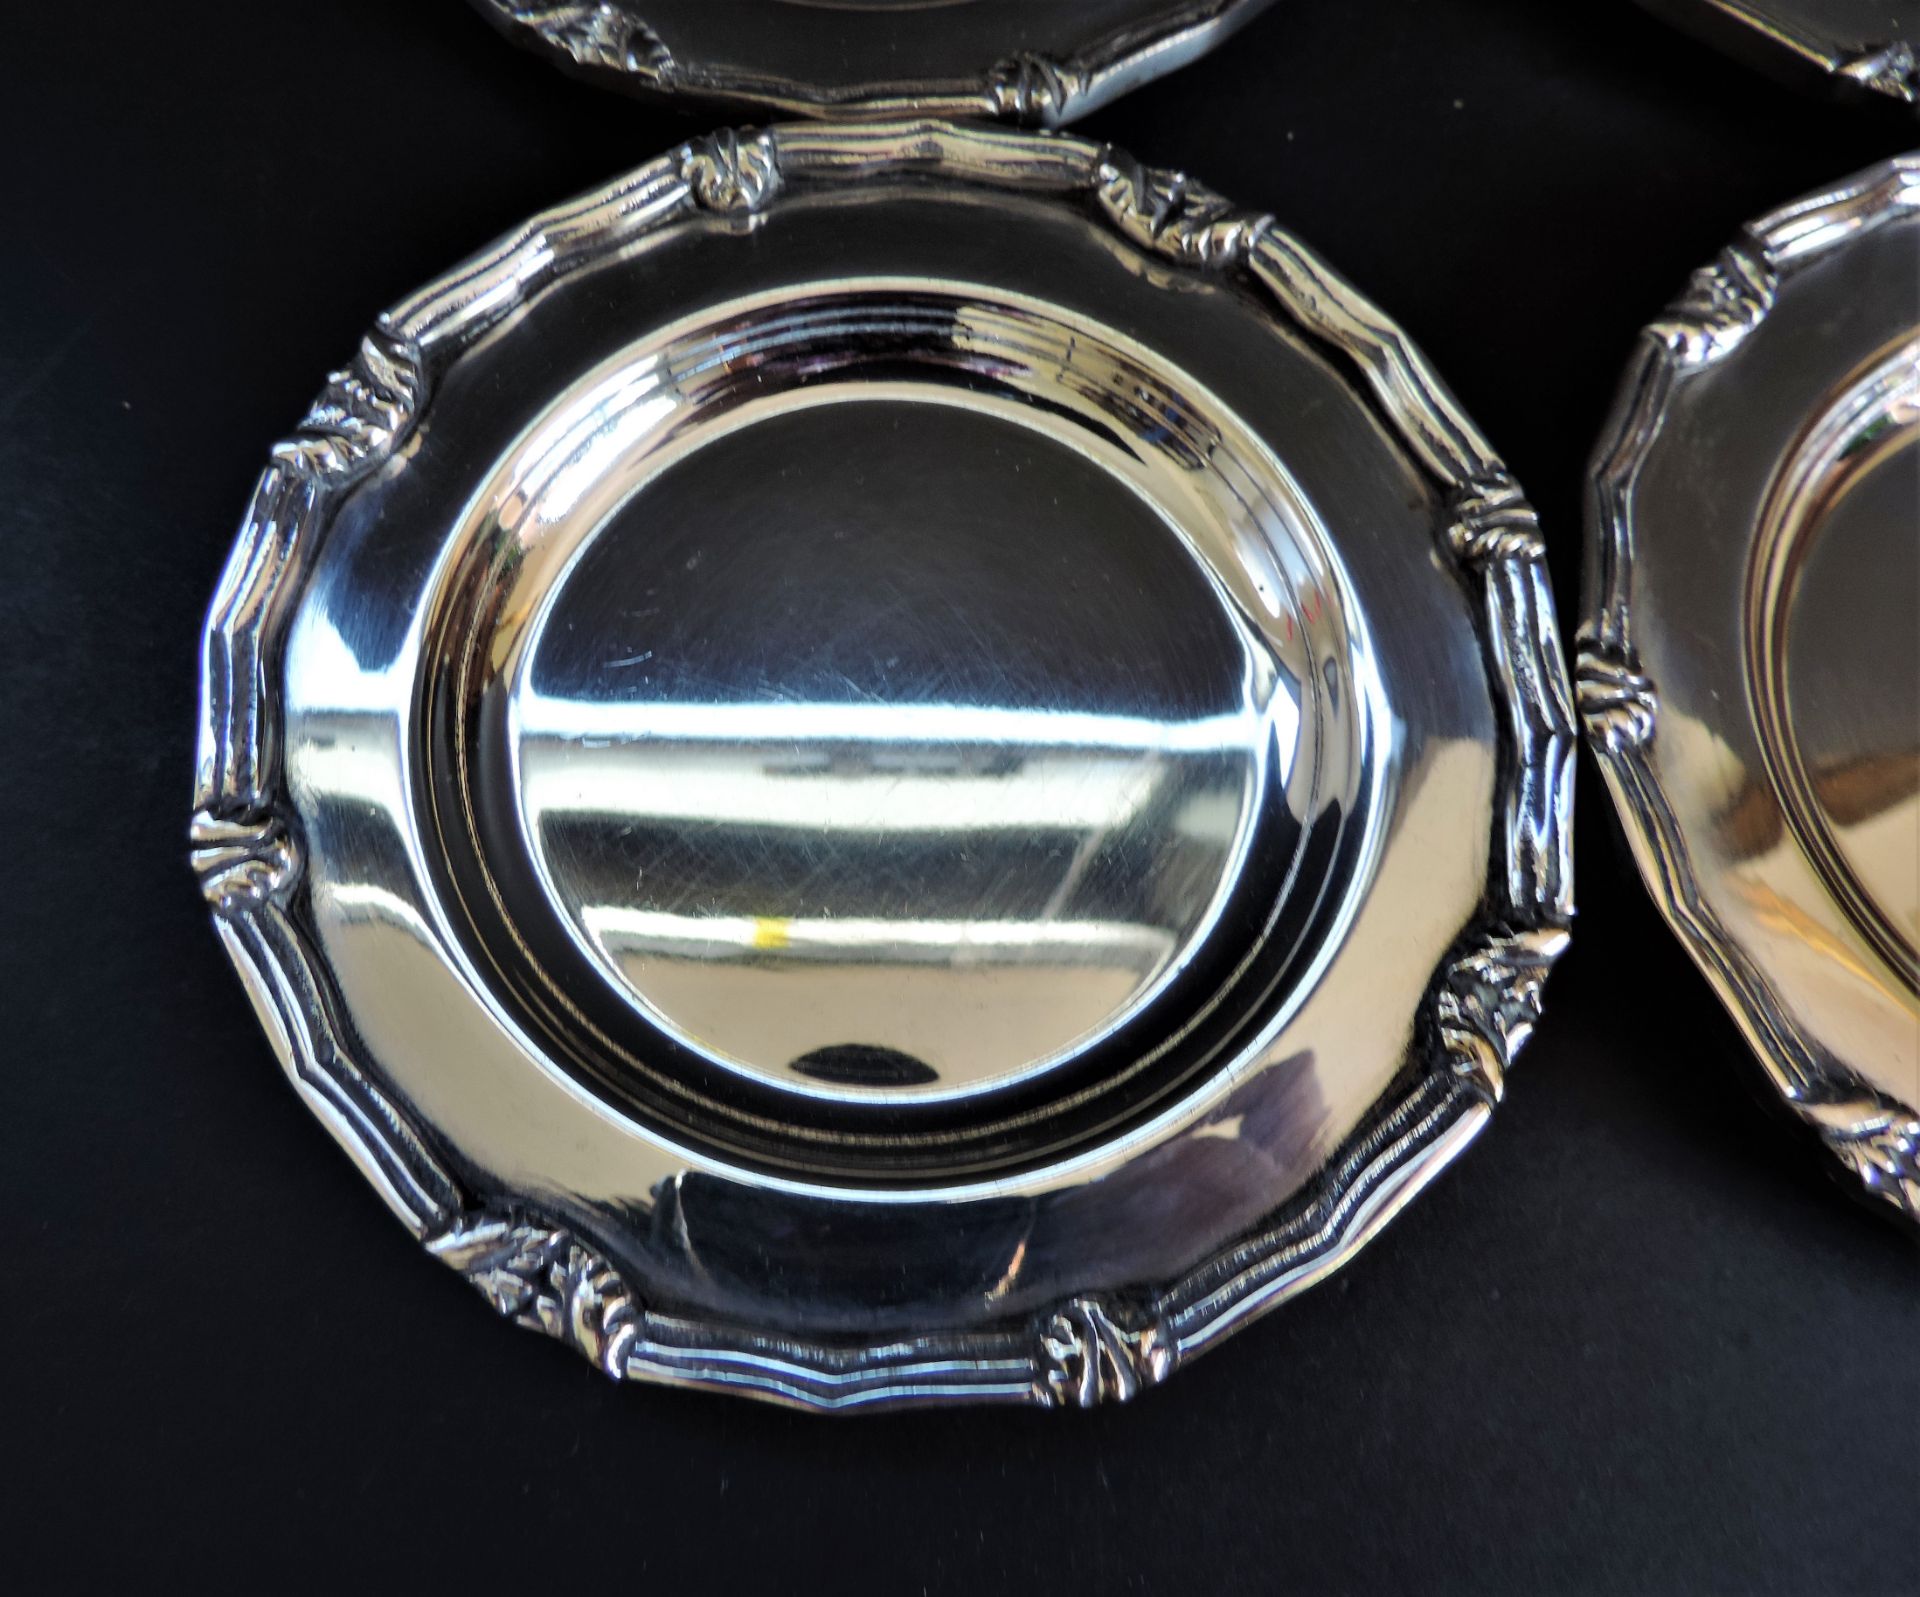 Vintage Silver Plated Coasters - Image 2 of 3